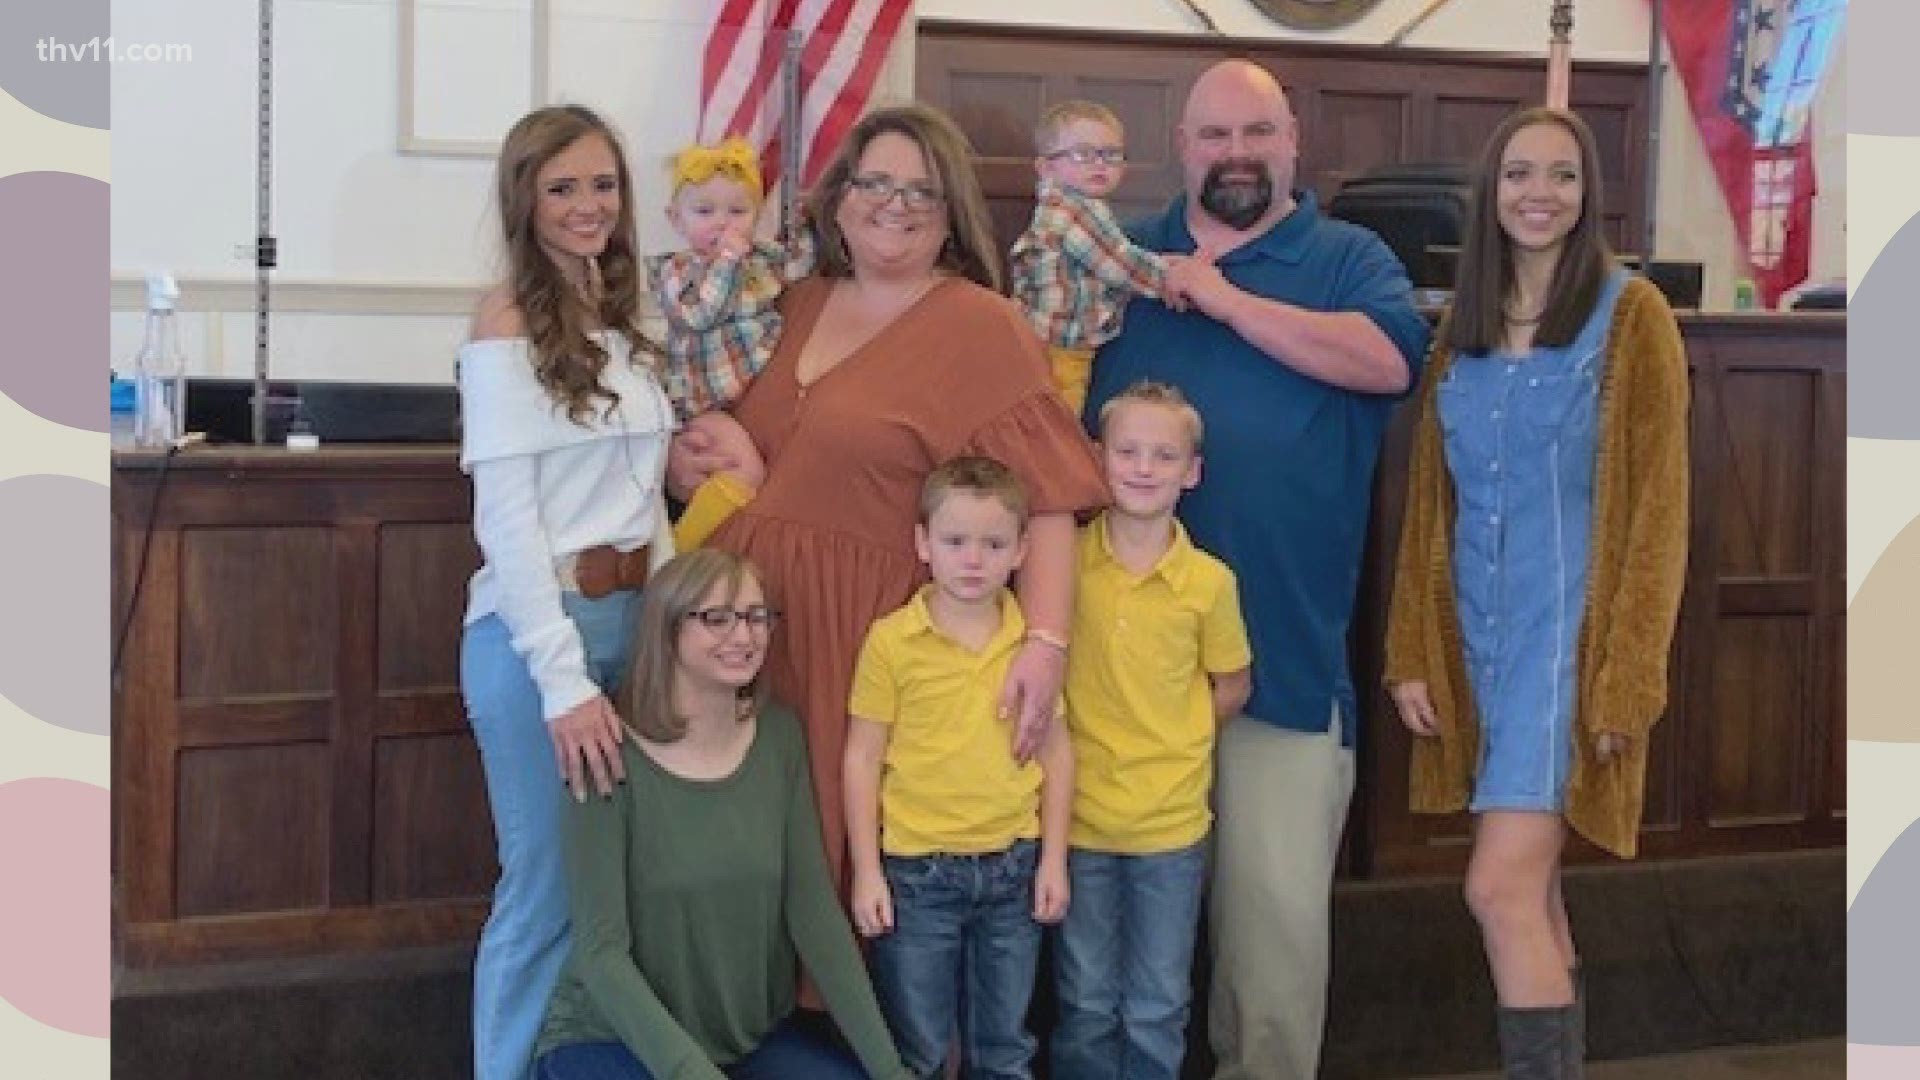 Adrienne and Luke Thomas are the reigning DCFS Area 7 Foster Parents of the Year. They are advocates for fostering and adopting sibling groups.